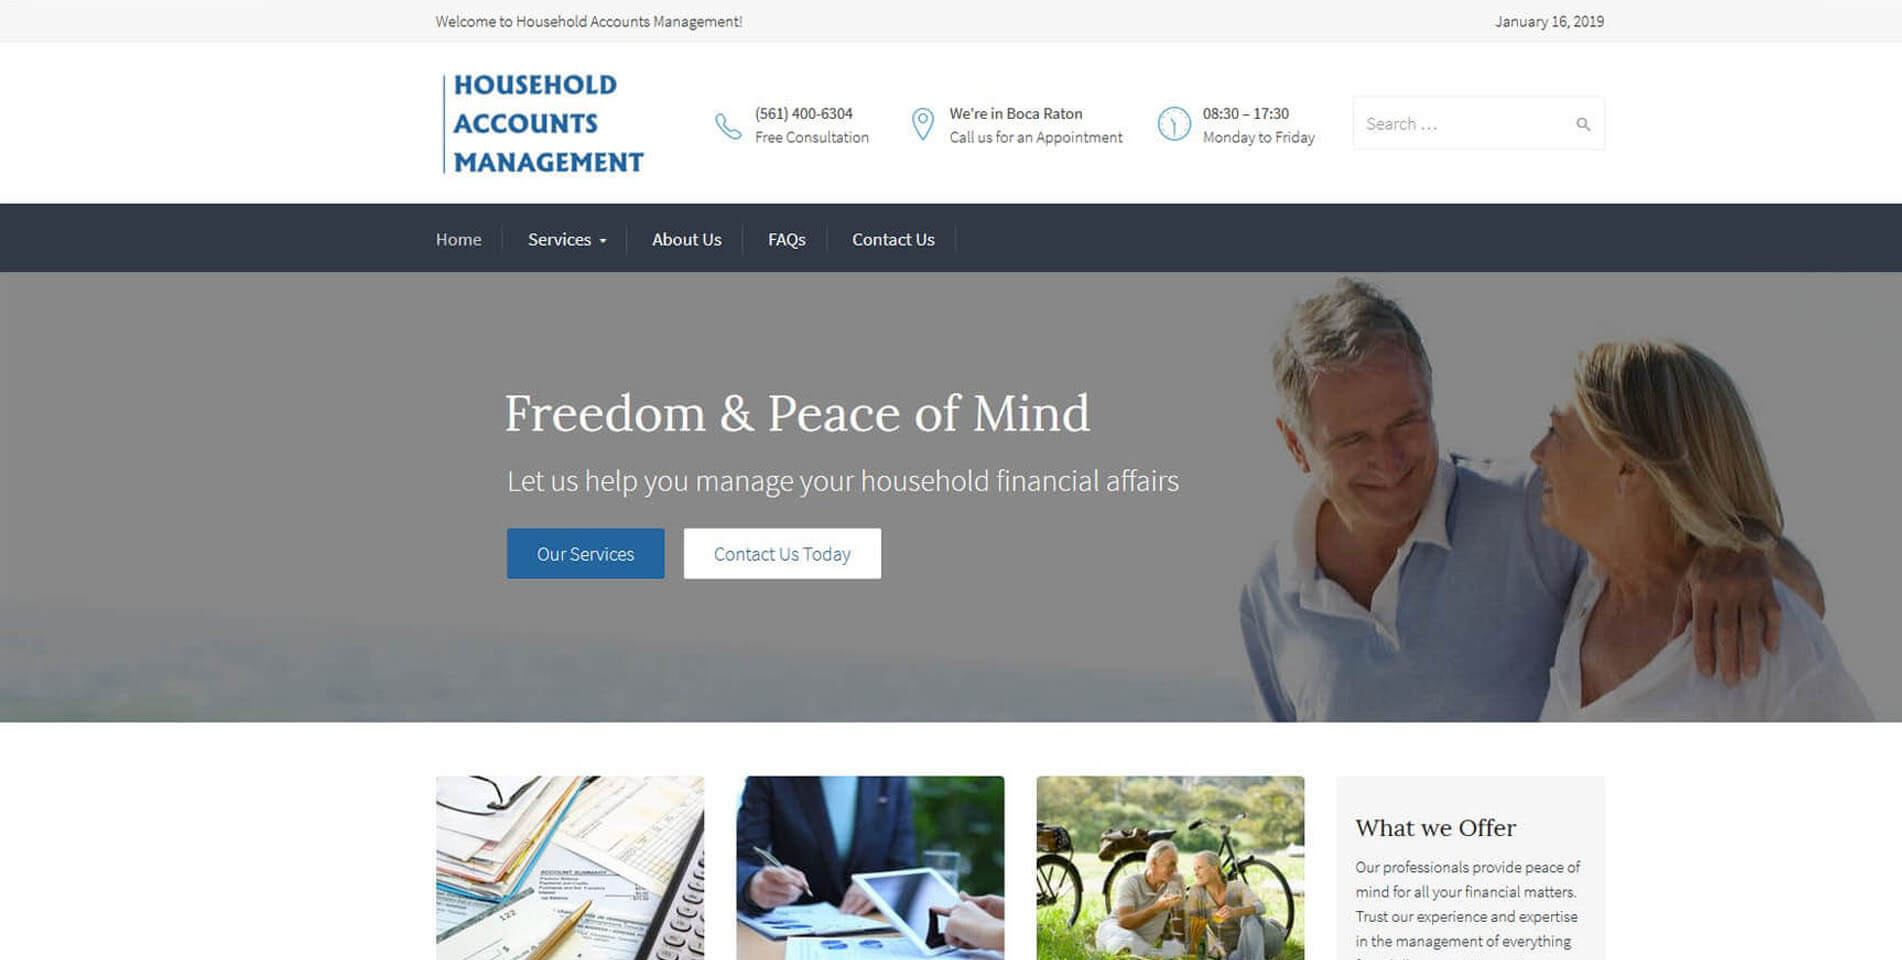 An image of the homepage of Houselhold Account Management, website created by Not Fade Away Marketing